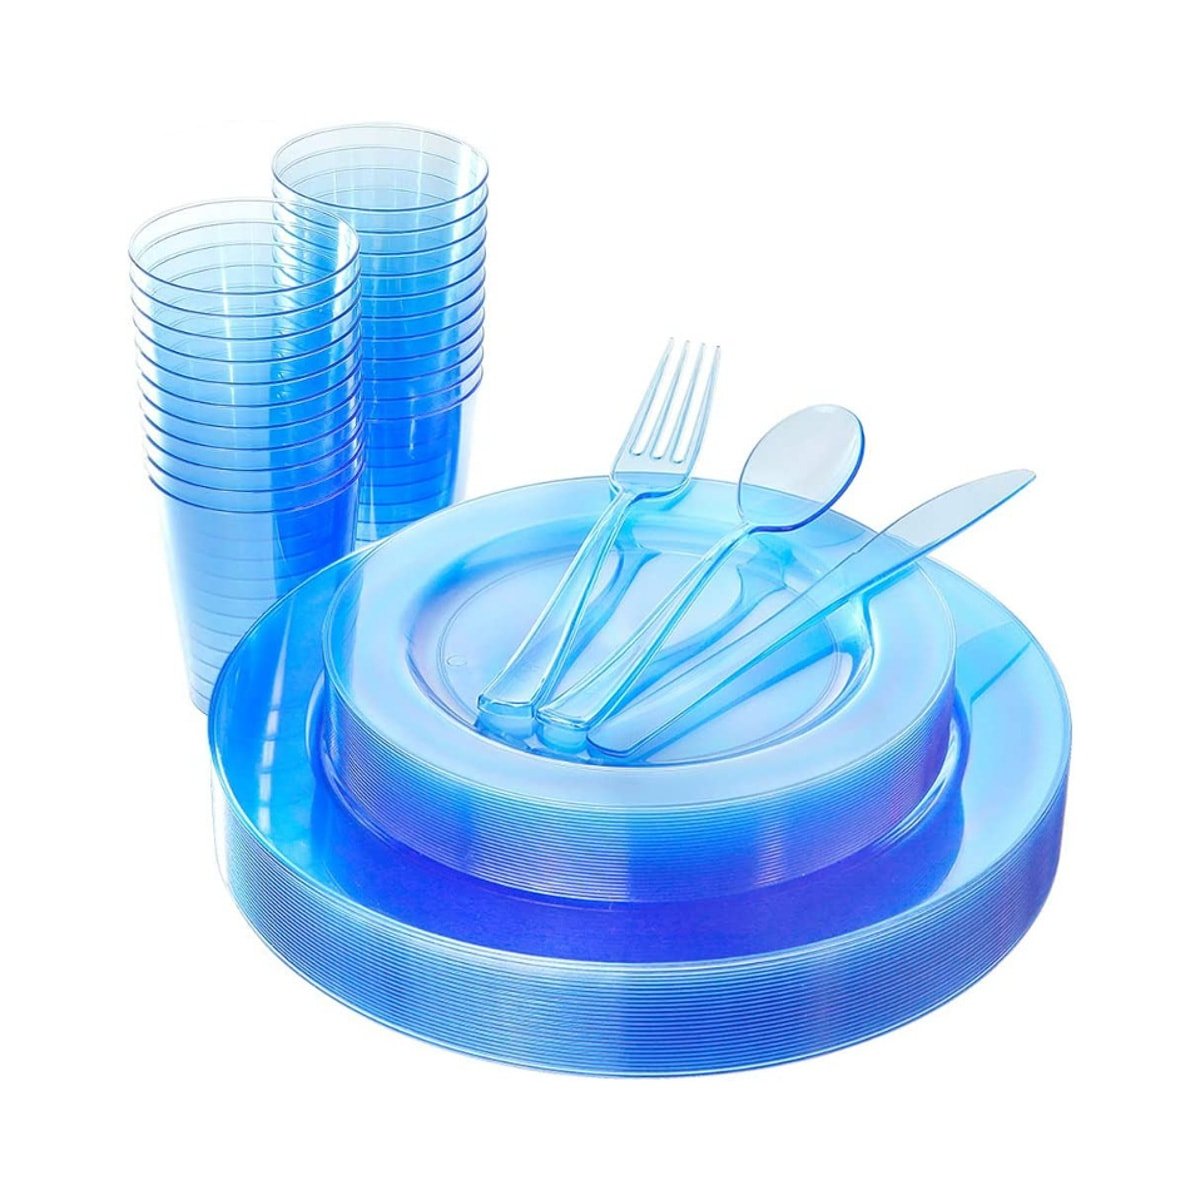 A set of blue plastic plates, utensils and cups.